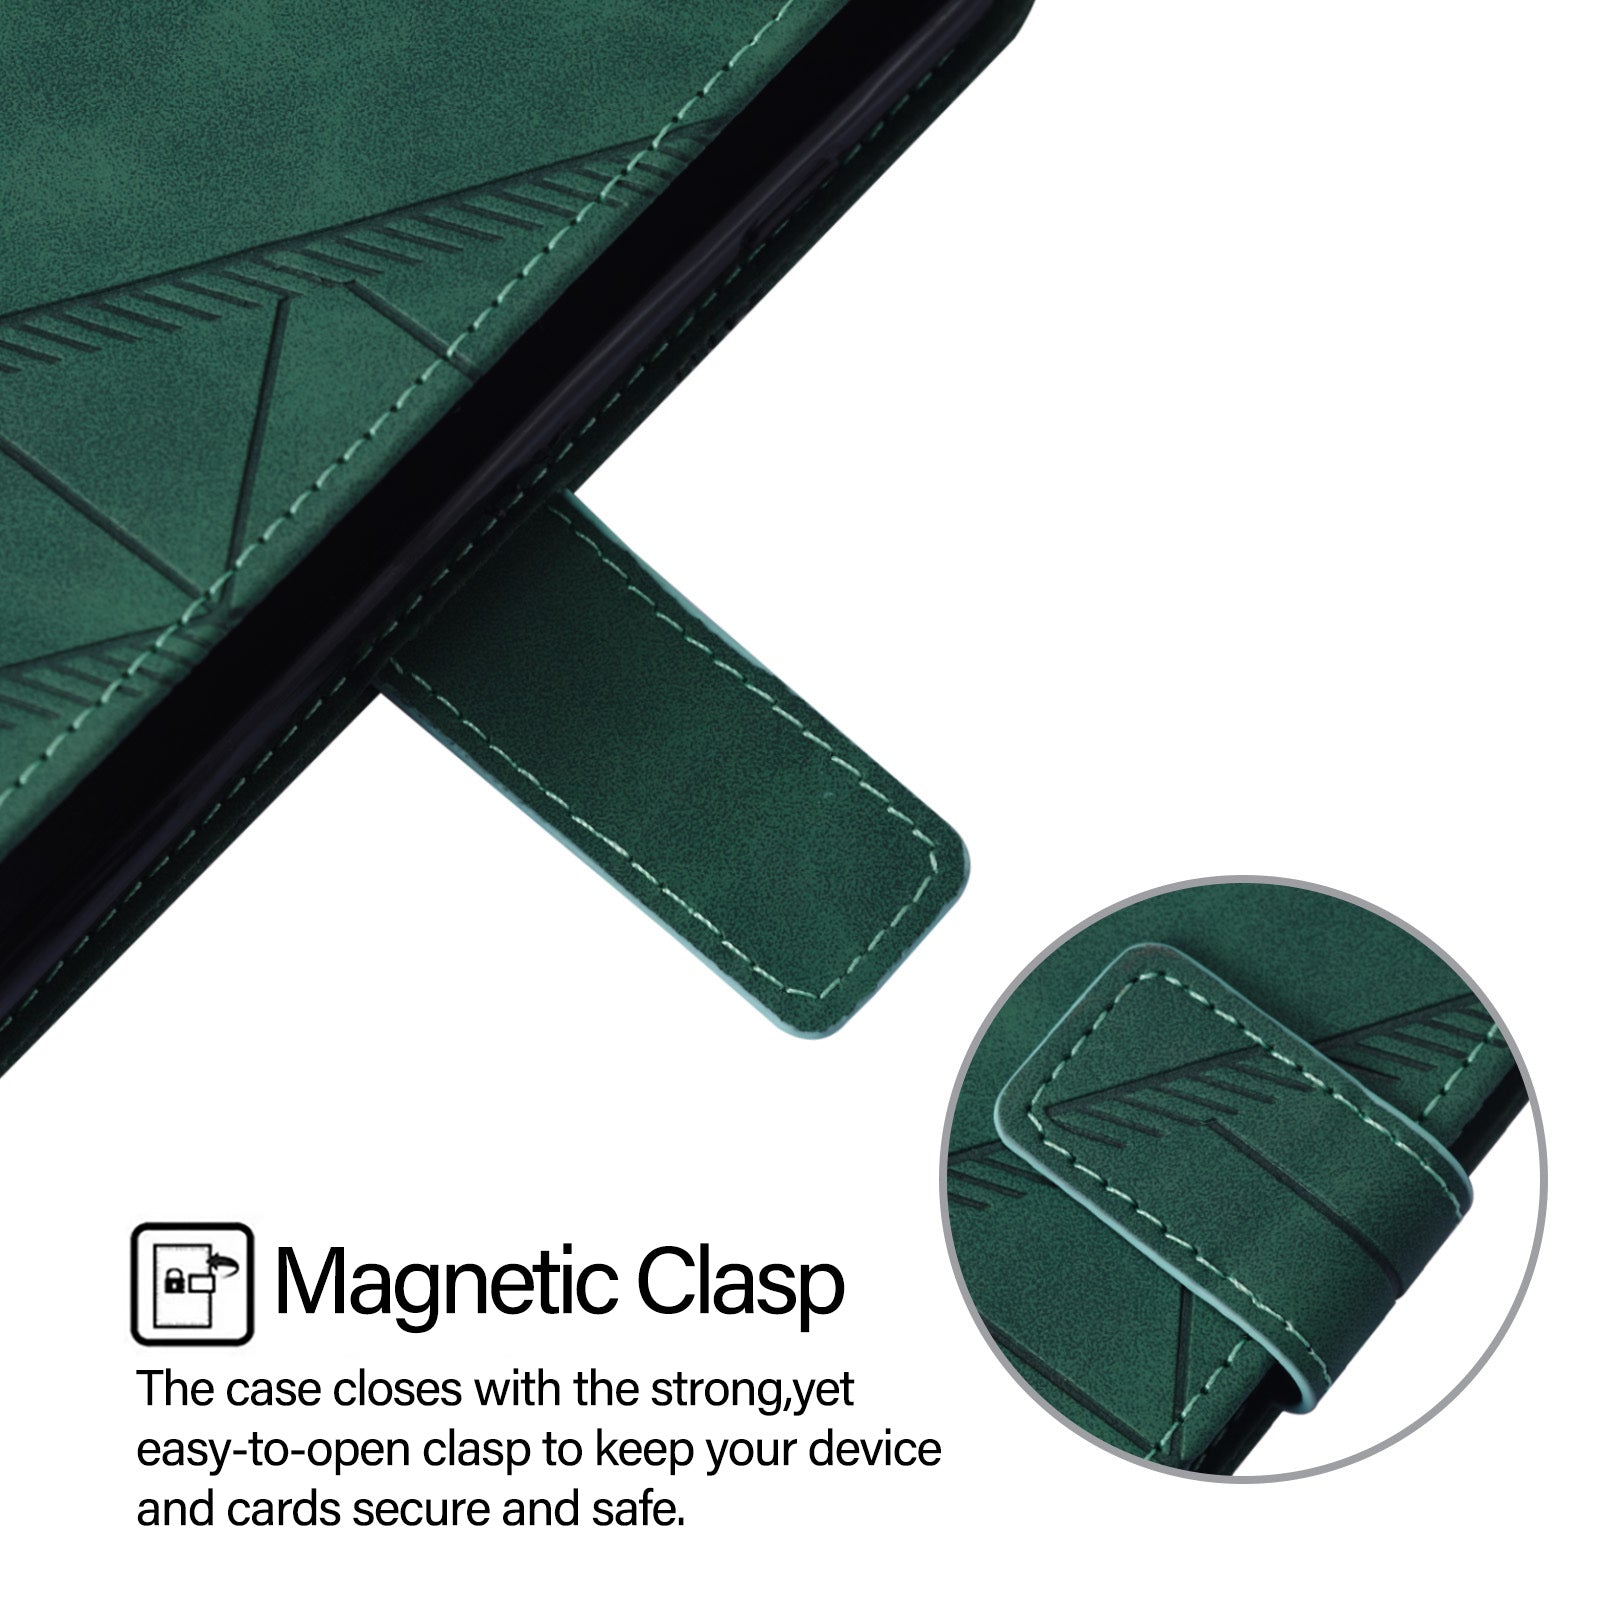 YB Imprinting Series-1 For OnePlus Nord CE4 5G Leather Wallet Case Phone Cover with Strap - Blackish Green